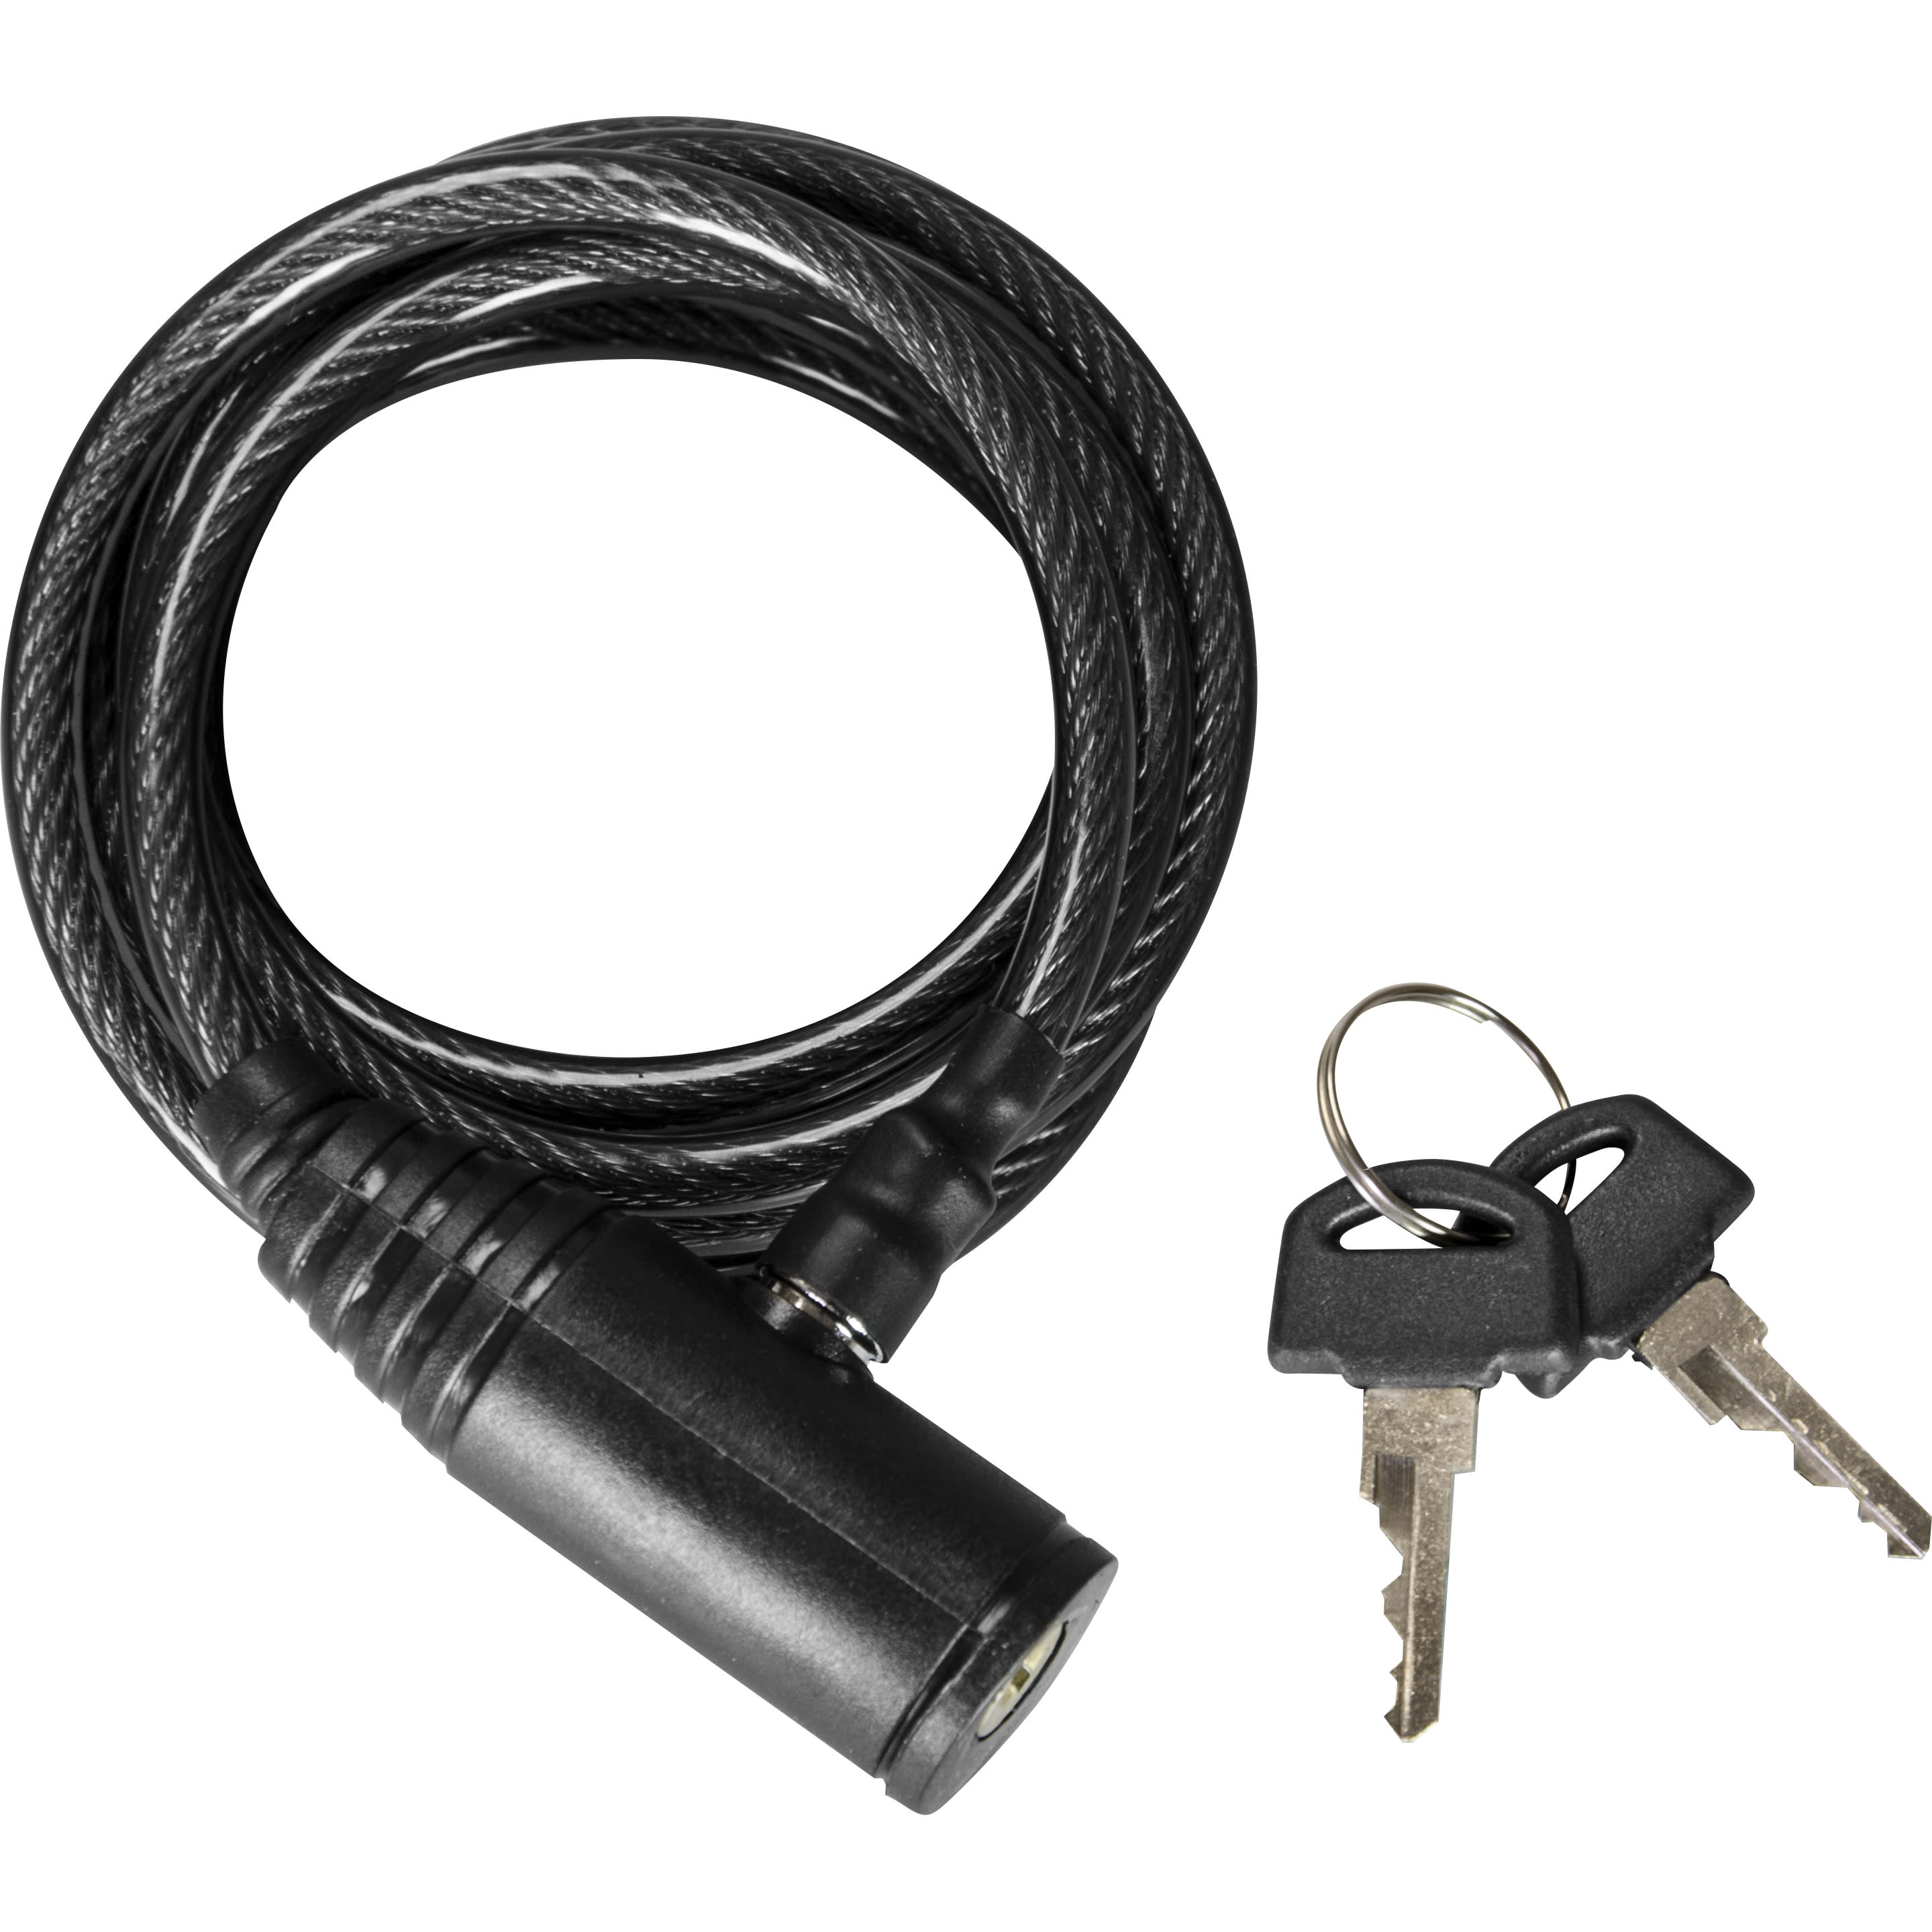 SPYPOINT® 6' Cable Lock